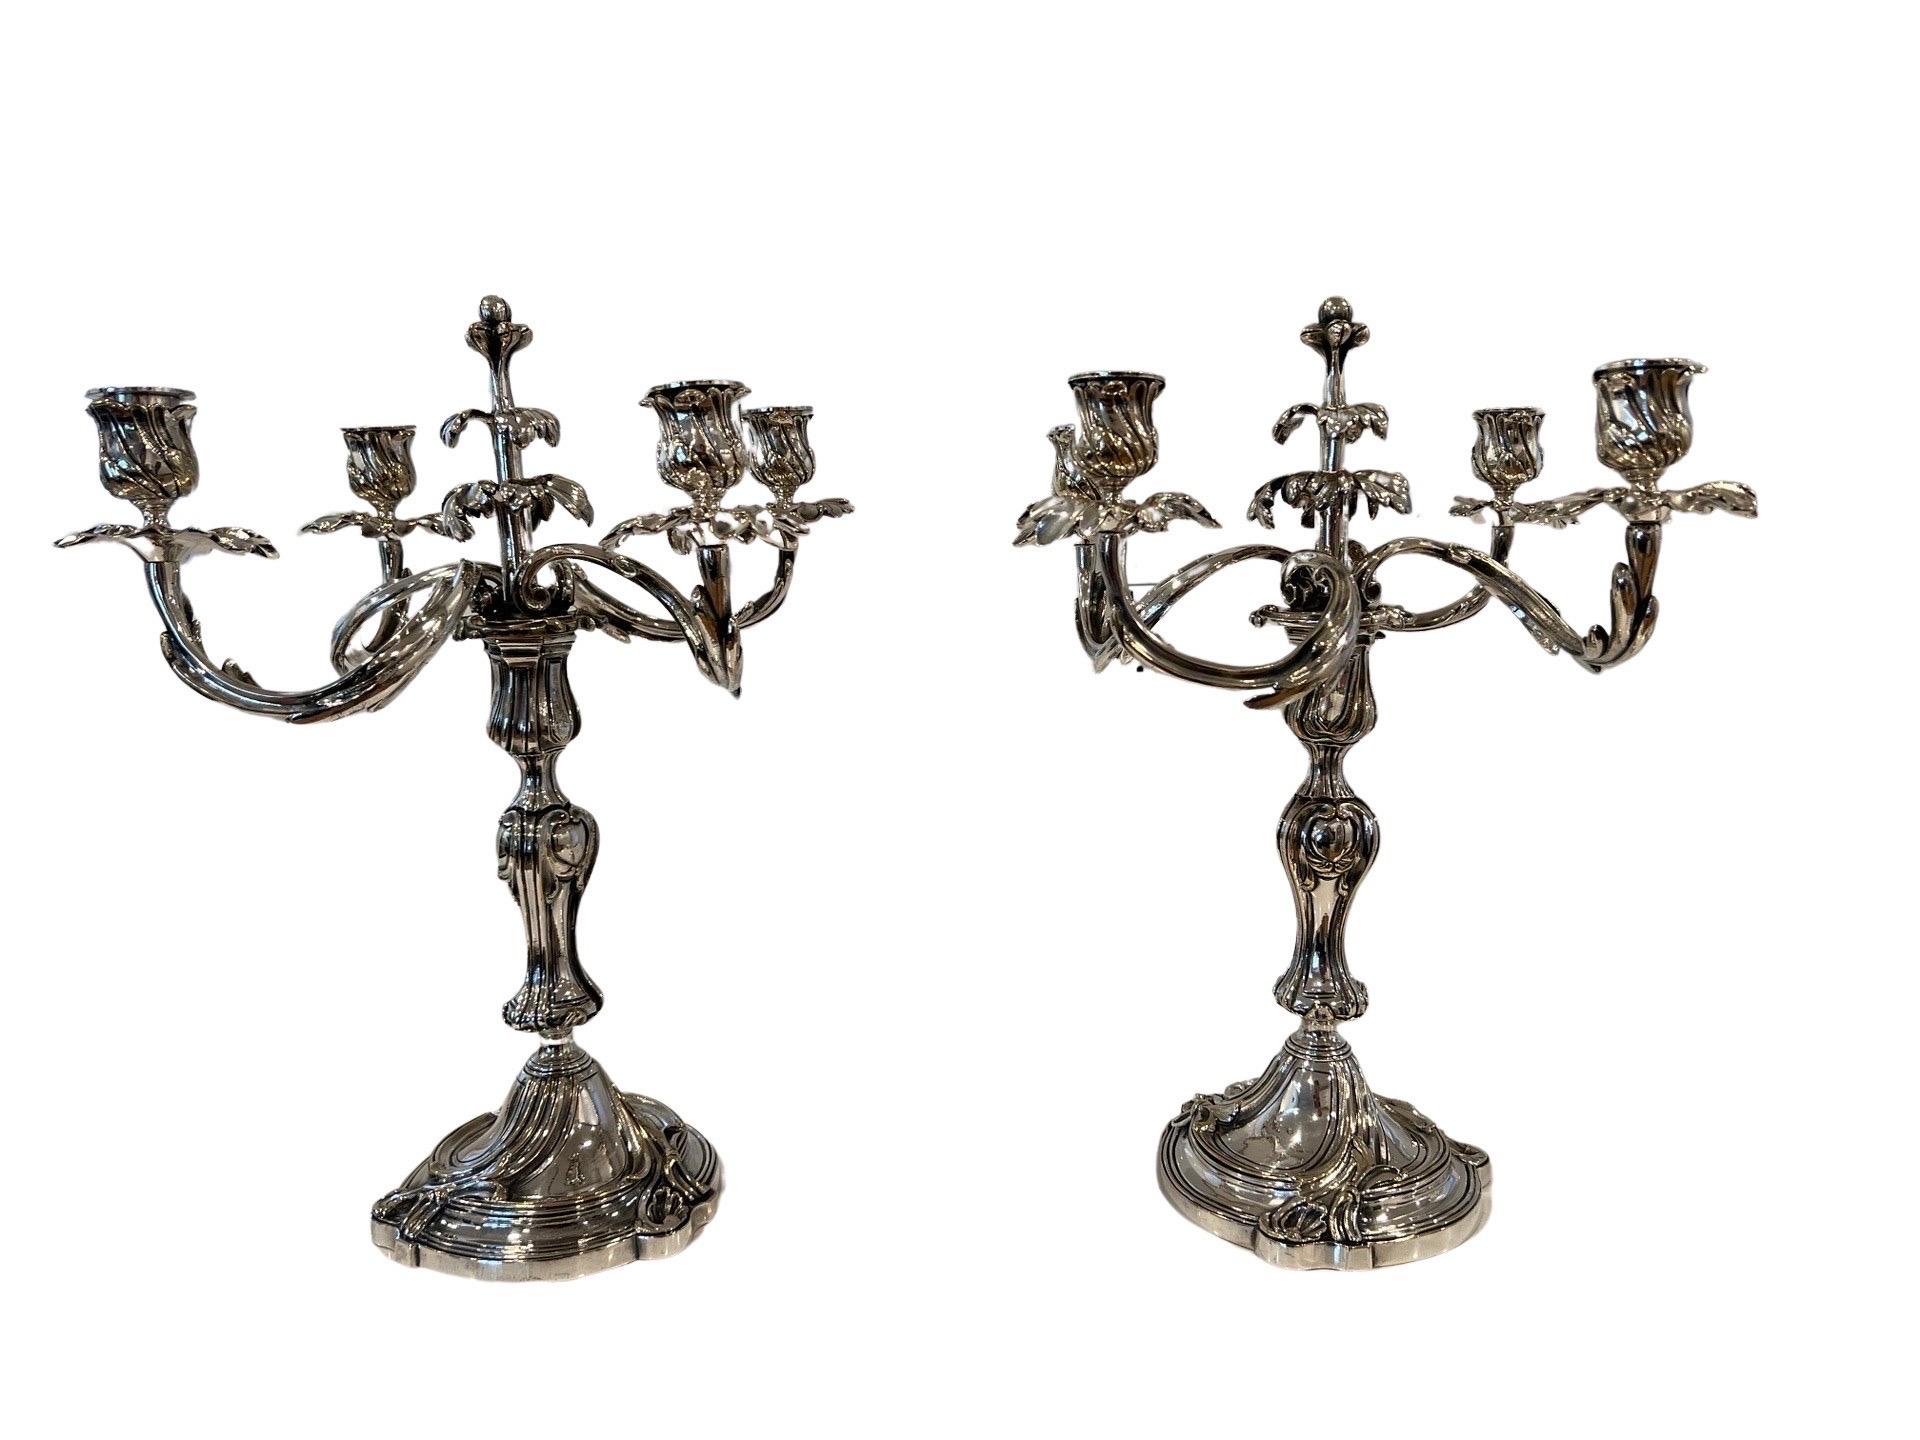 Christofle (French, founded 1830), L 20th century.

Each silver plate candelabrum with a convertible candlestick column with knopped stem on a swirled rocaille base issuing five radial spiral arms, each terminating in a foliate-style capital and